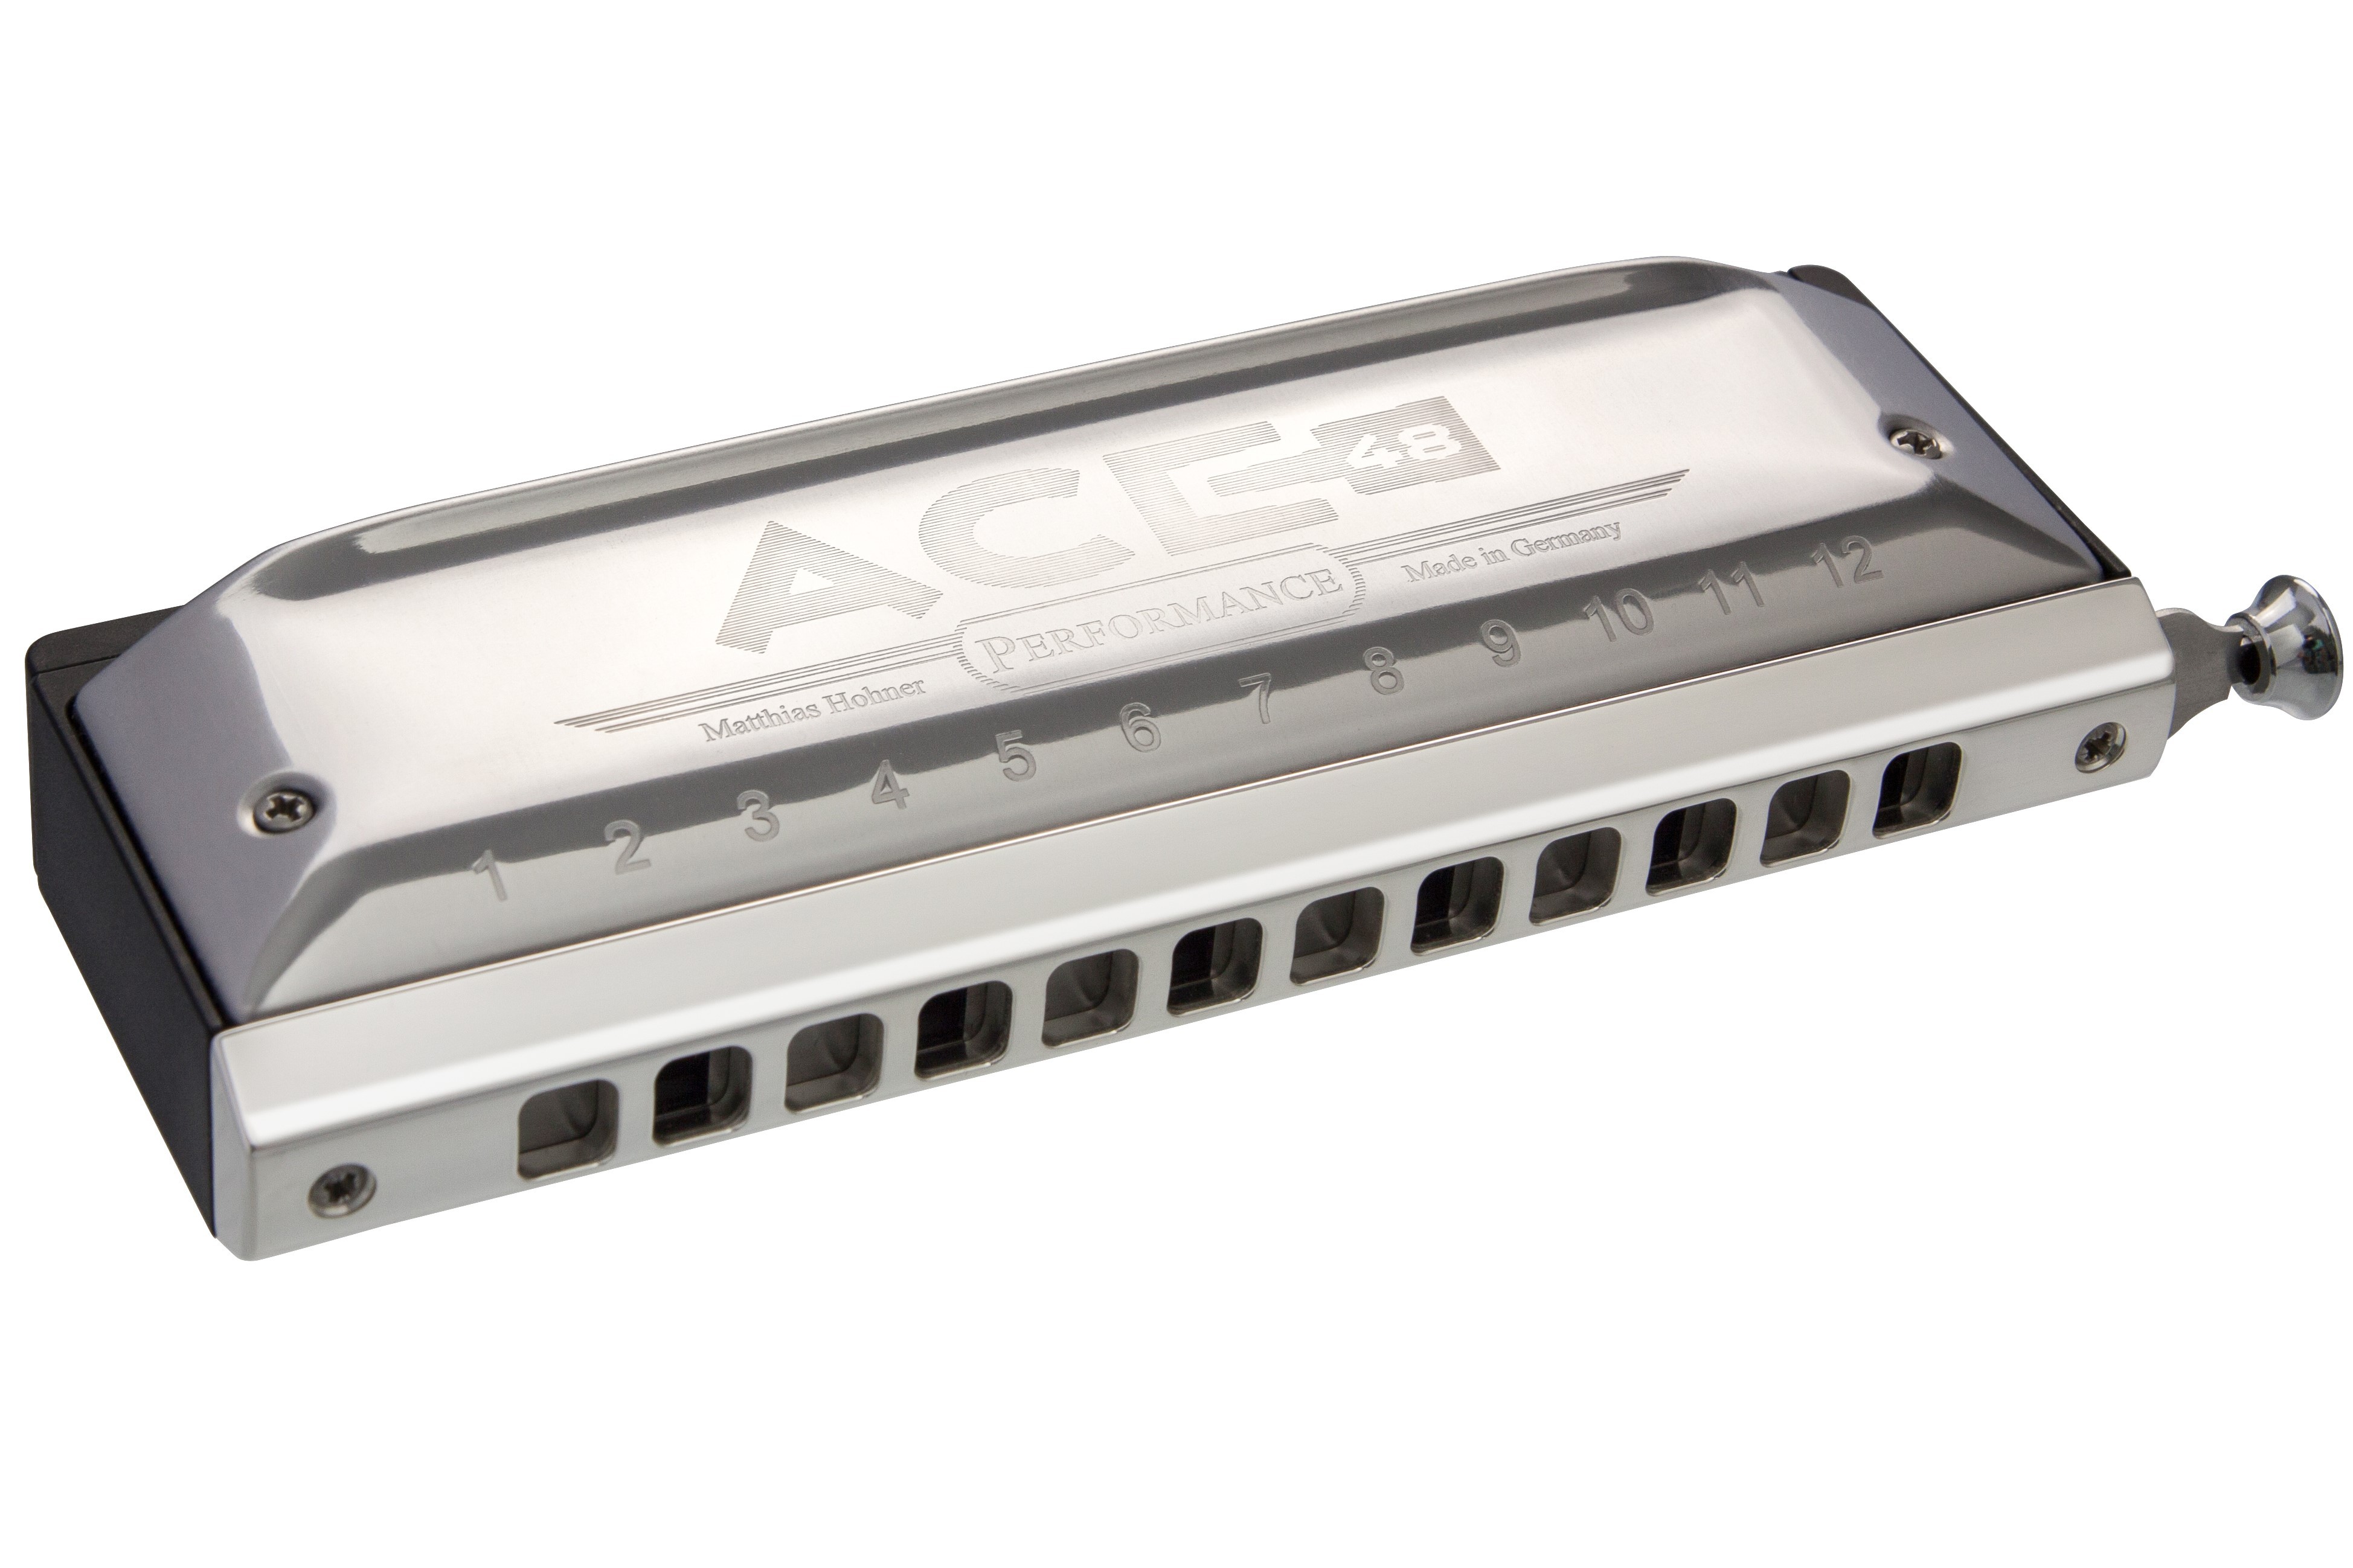 HOHNER ACE 48